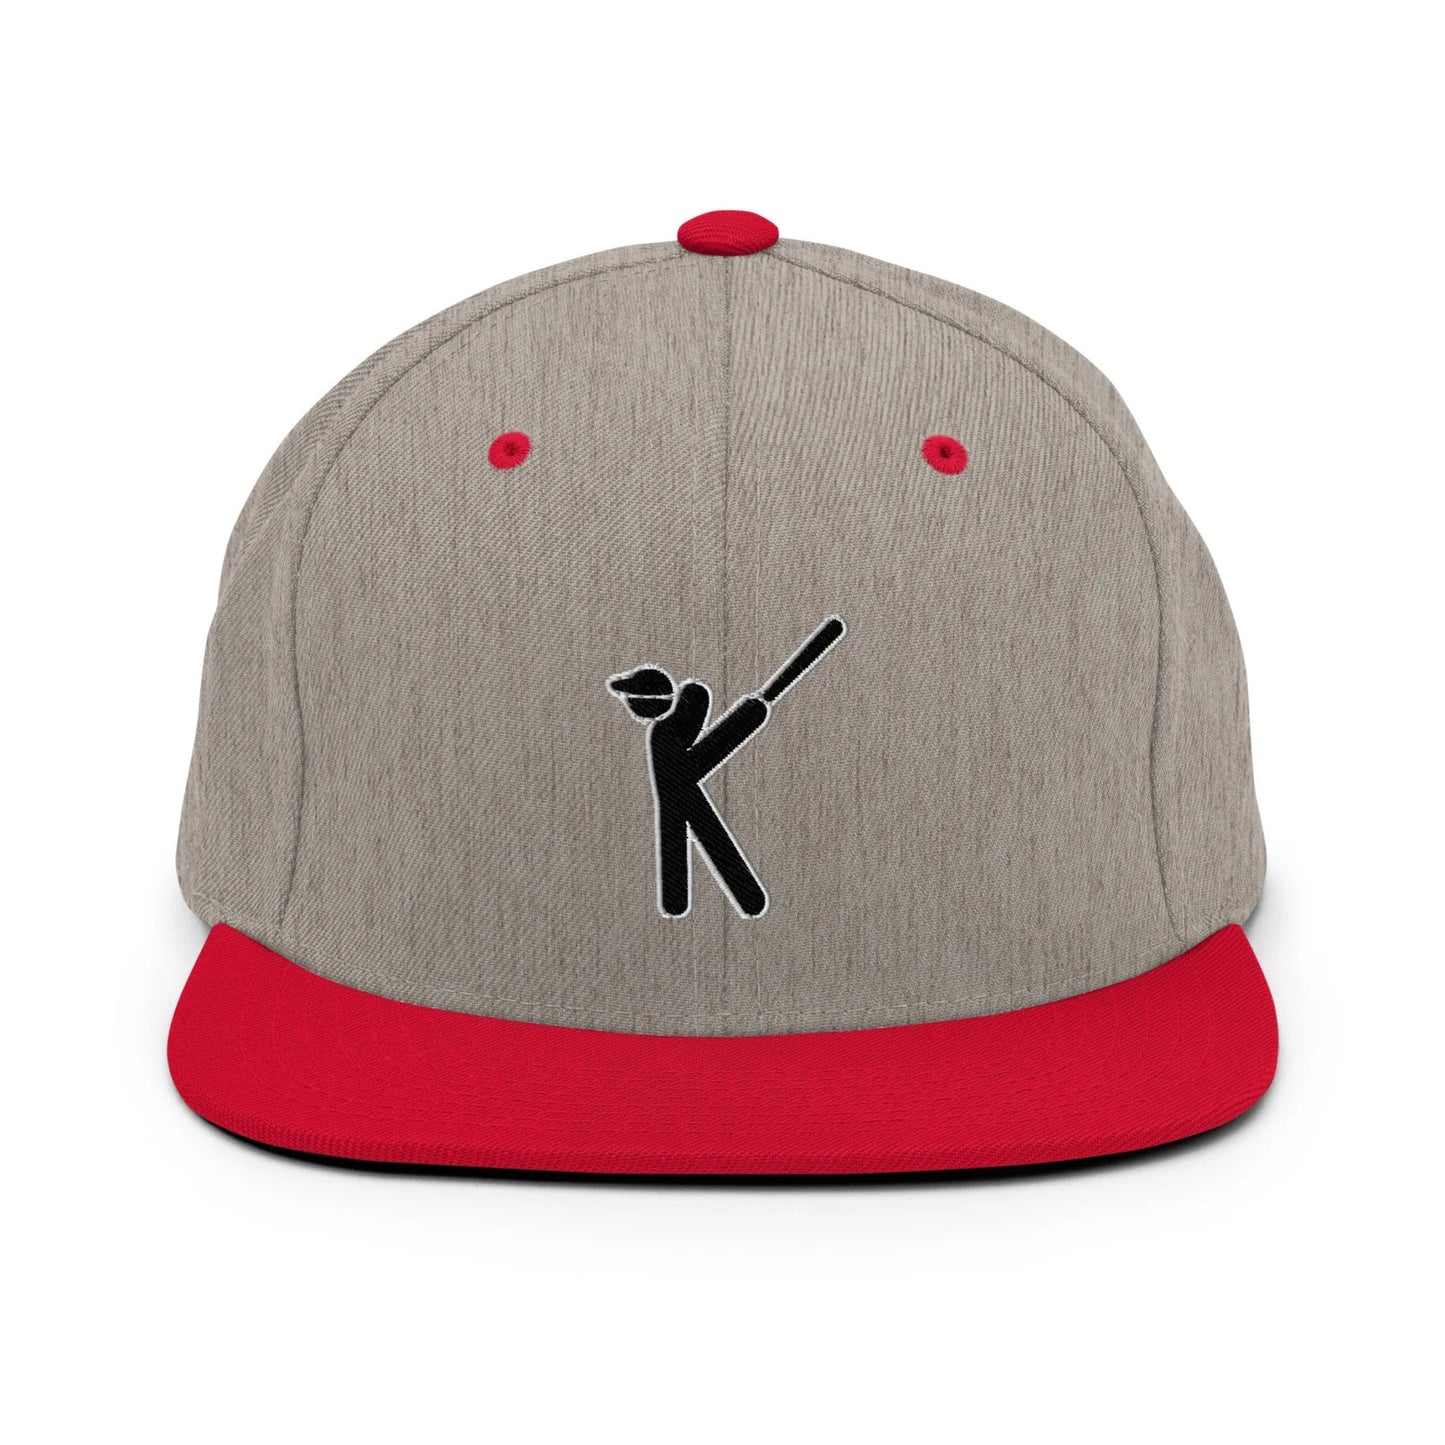 Kasabe ShowZone snapback hat in heather grey with red brim and accents